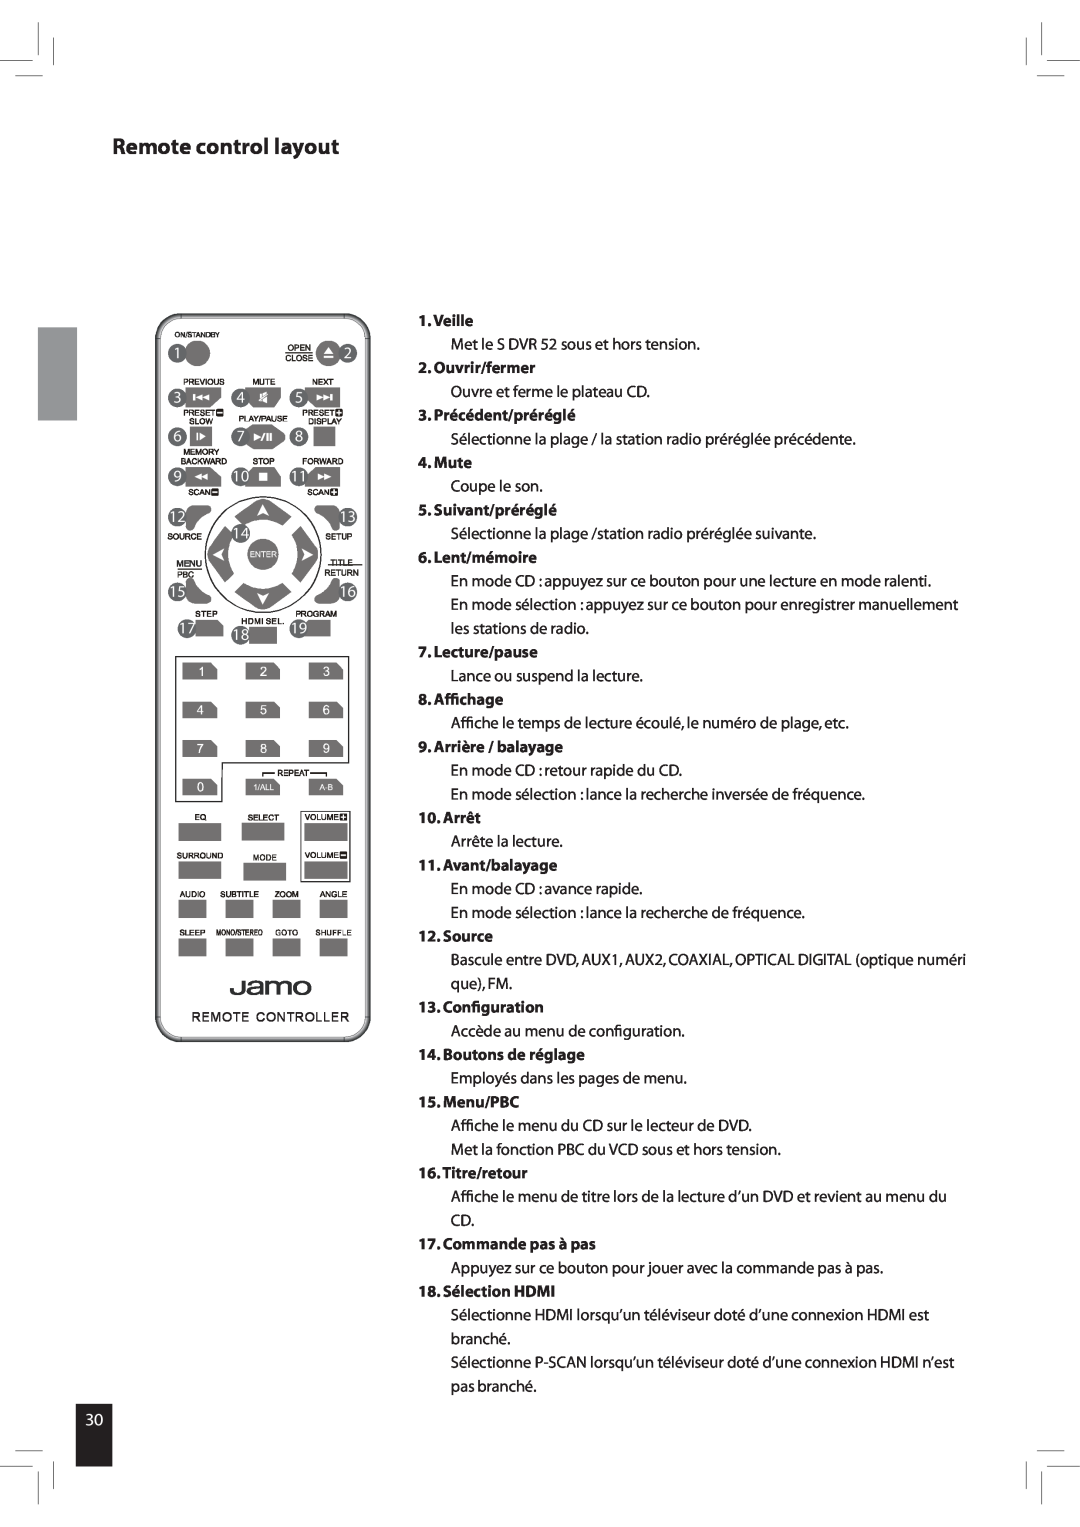 JAMO S 502 manual Remote control layout, Veille 